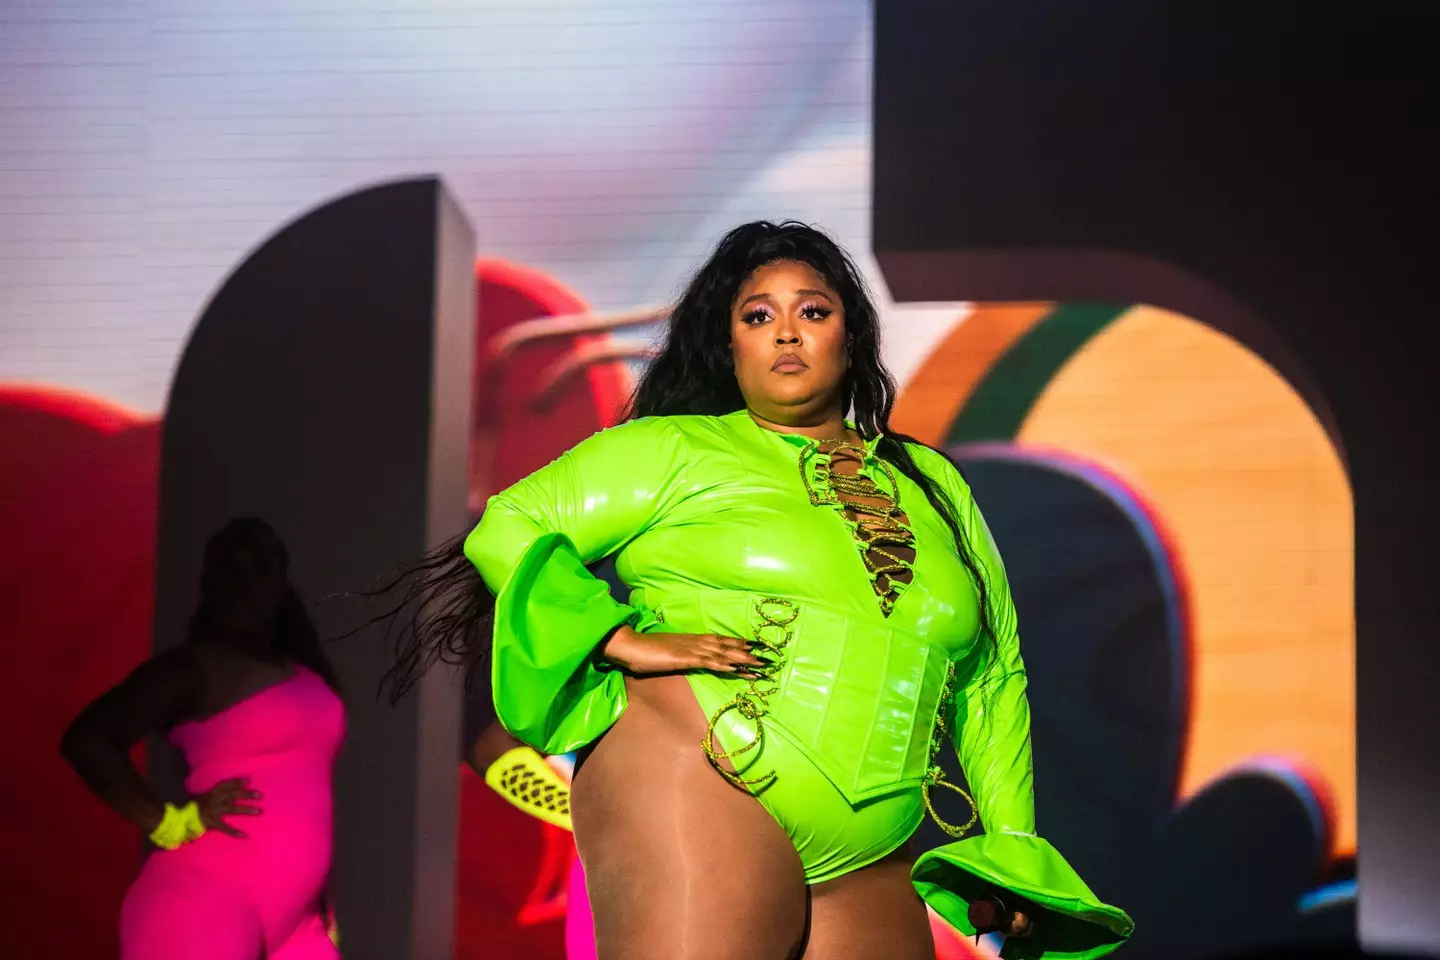 Lizzo is celebrated for her body positivity messages.